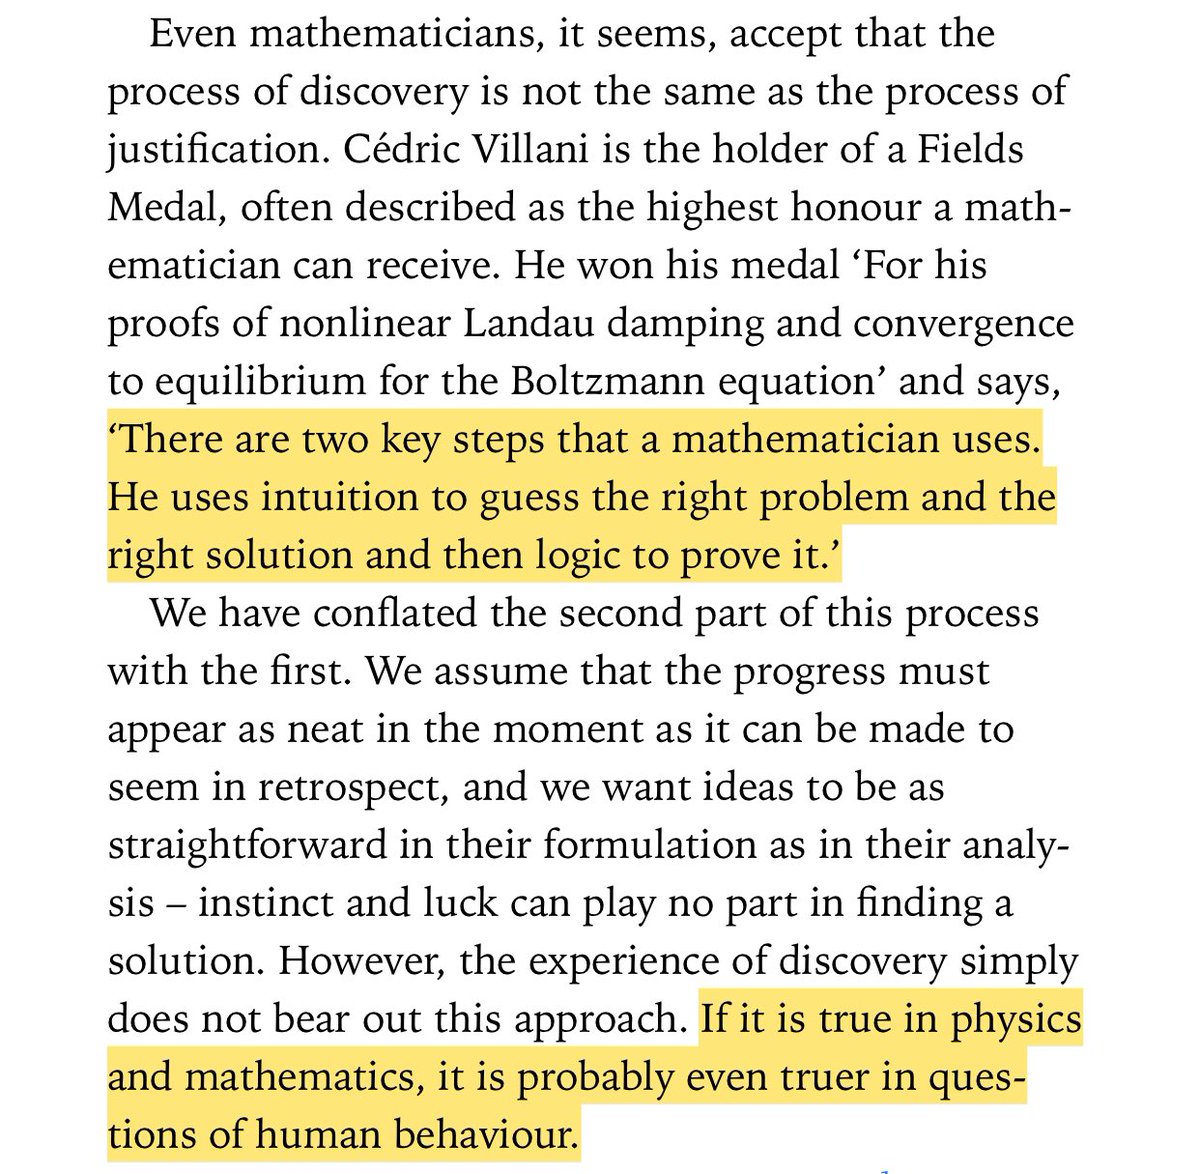 “There are two key steps that a mathematician uses. He uses intuition to guess the right problem and the right solution and then logic to prove it.”